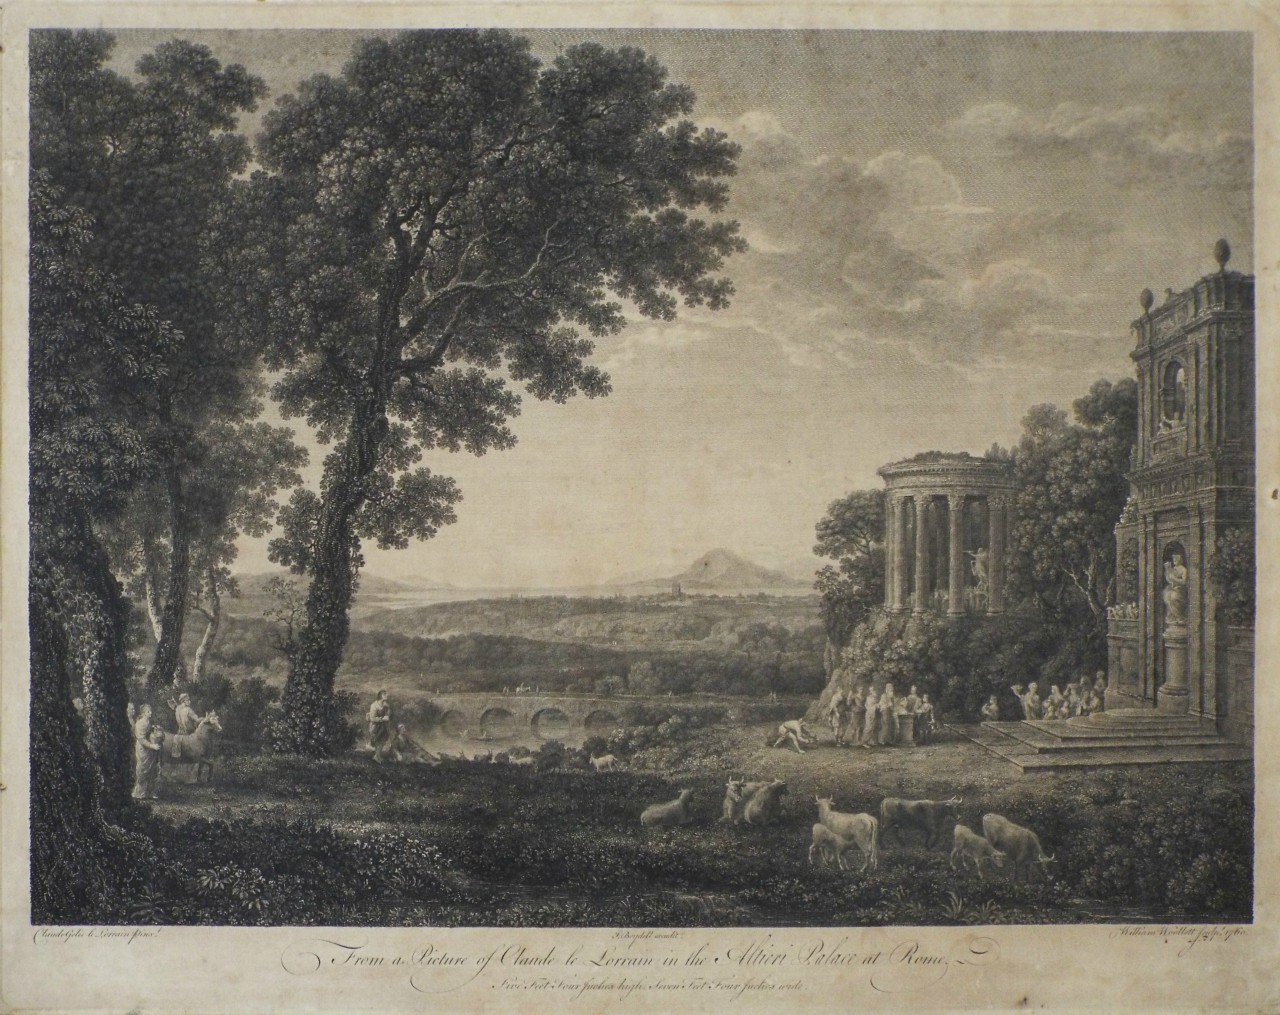 Print - (The Temple of Apollo) From a Picture of Claude le Lorrain in the Altieri Palace at Rome. - Woollett